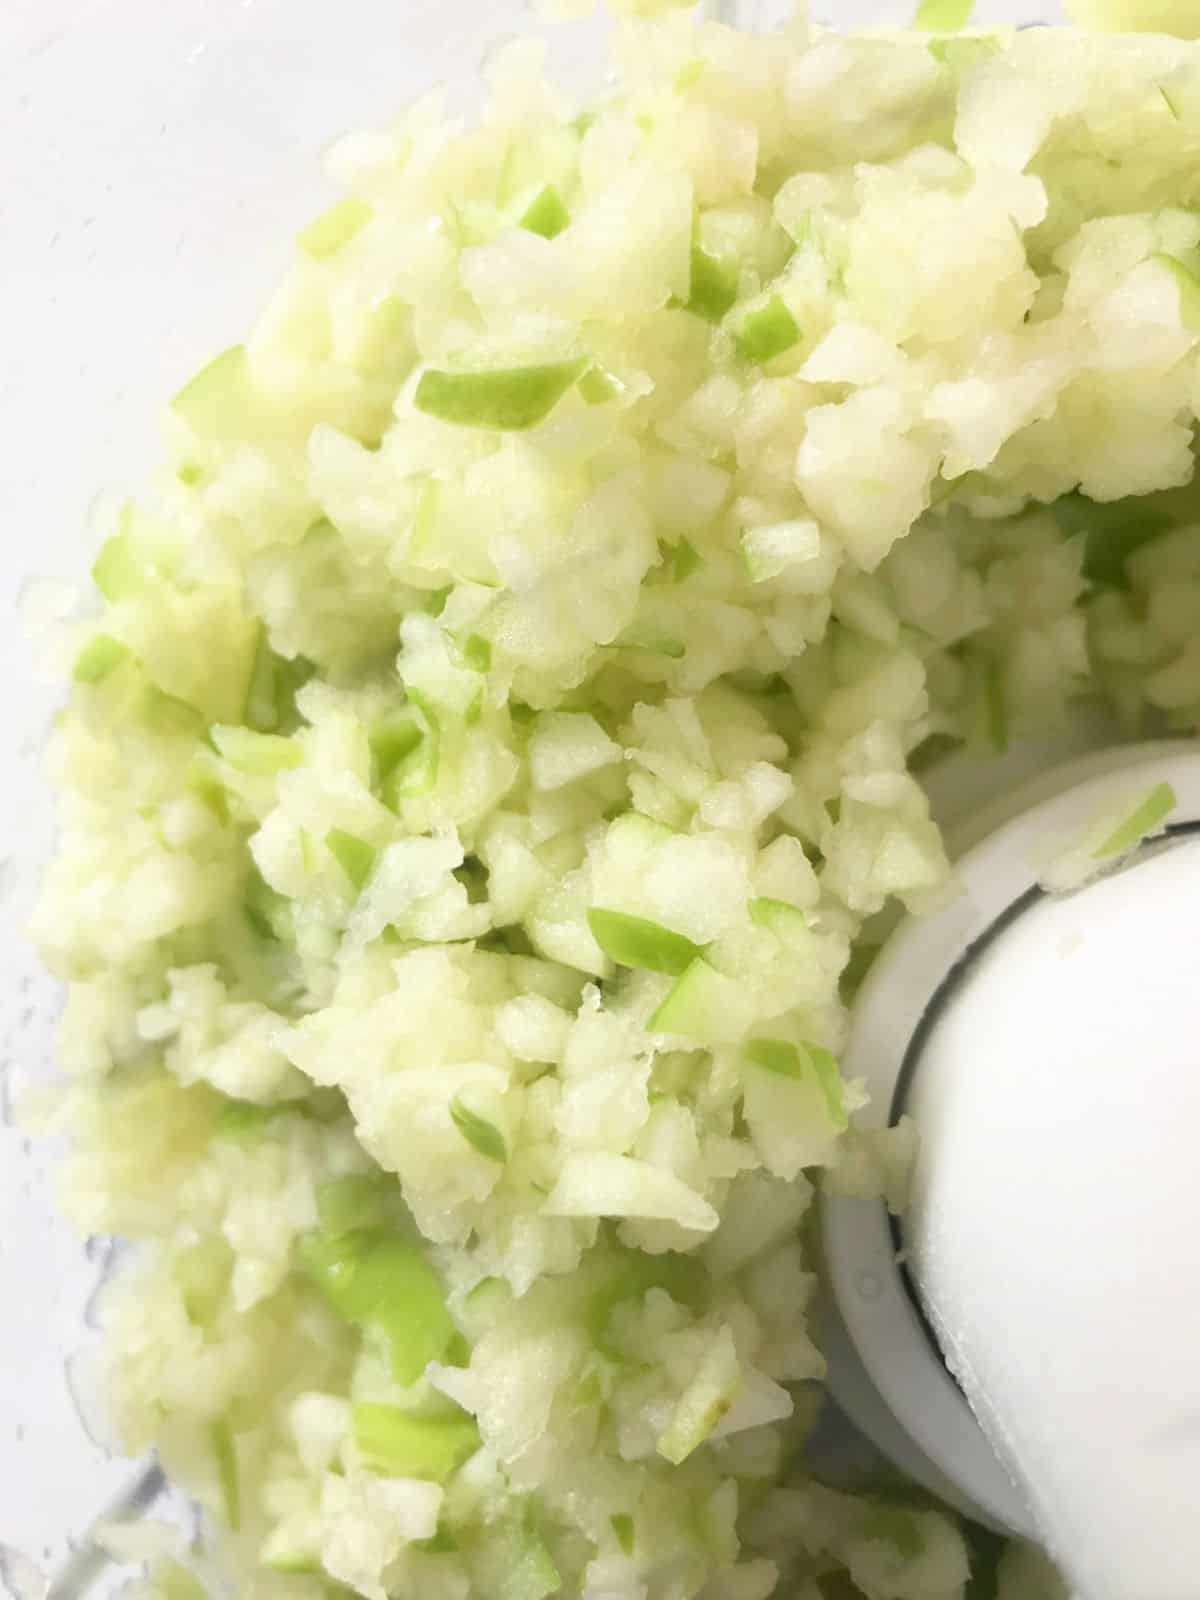 Chopped green apple with skin in food processor bowl